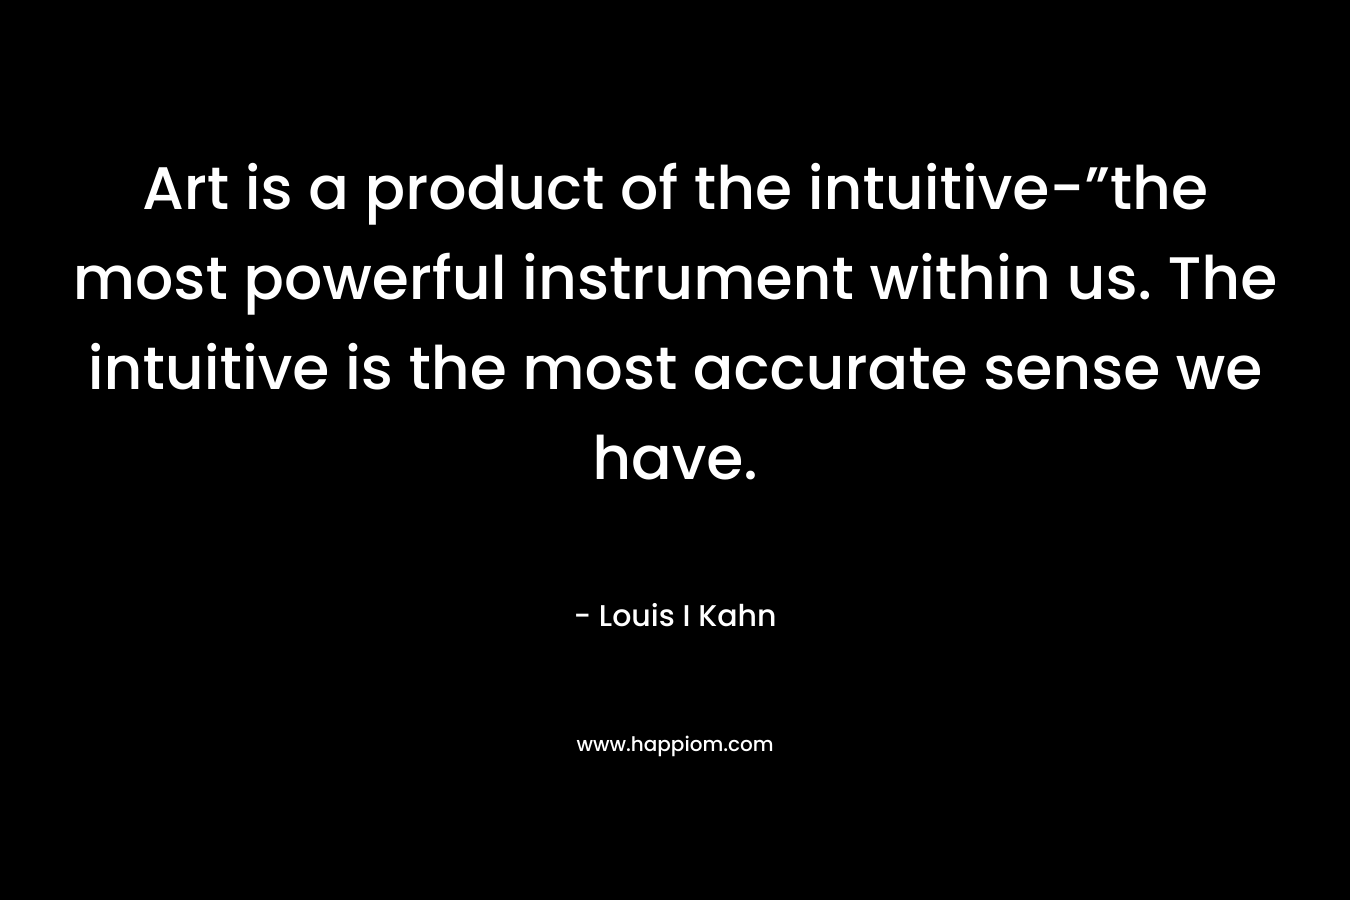 Art is a product of the intuitive-”the most powerful instrument within us. The intuitive is the most accurate sense we have. – Louis I Kahn